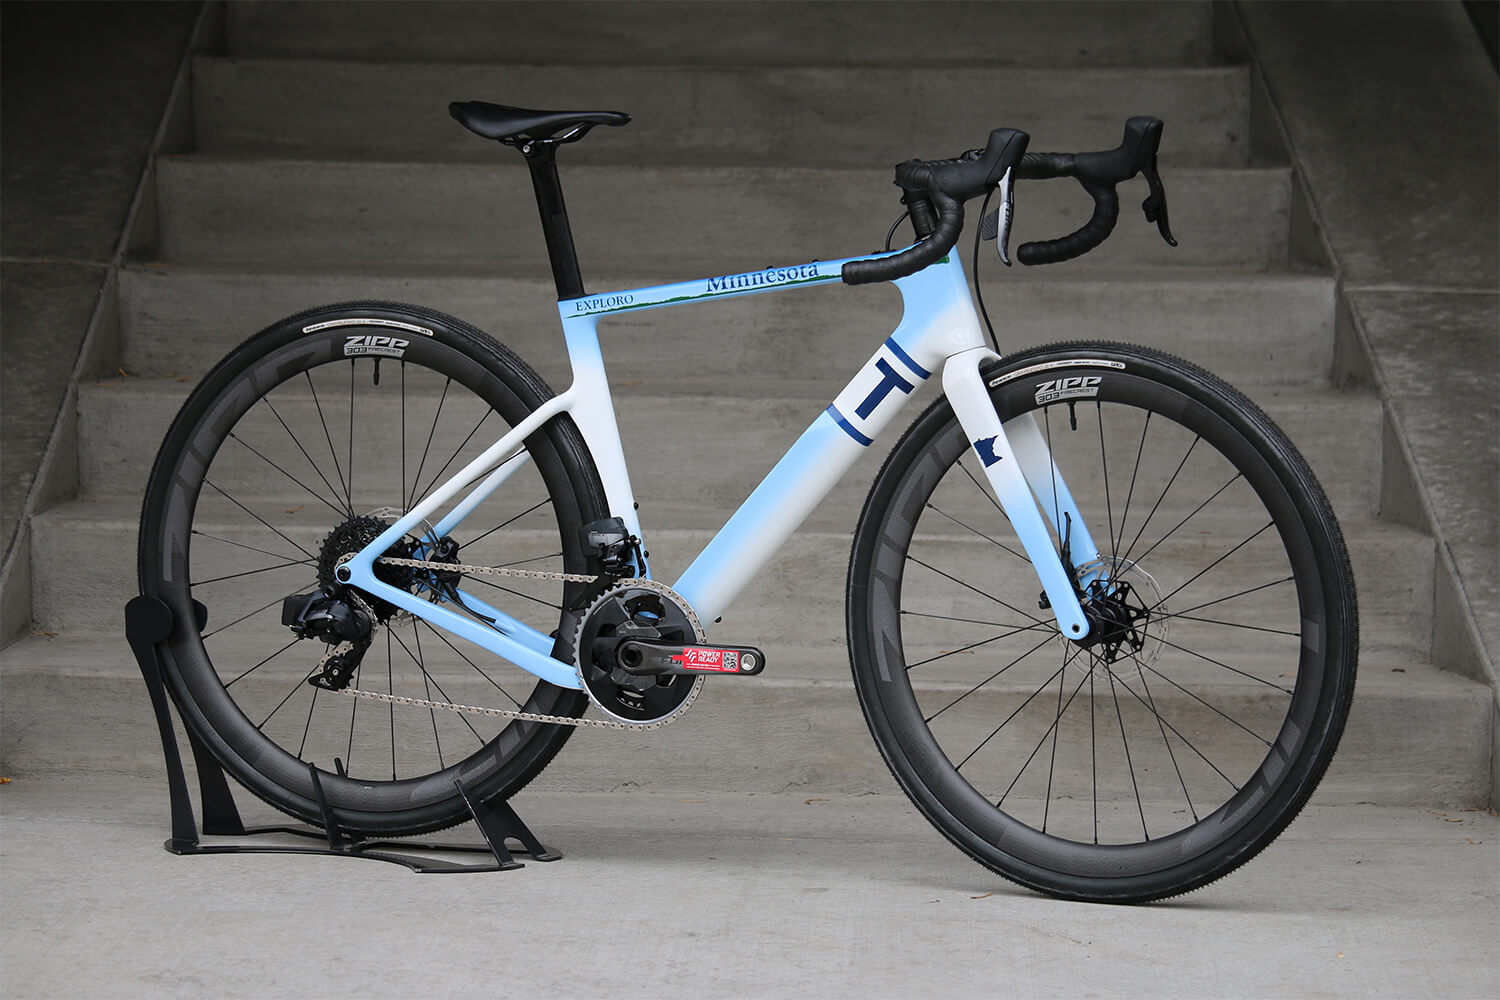 A 3T EXPLORO RACEMAX INSPIRED BY THE LAND OF 10,000 LAKES